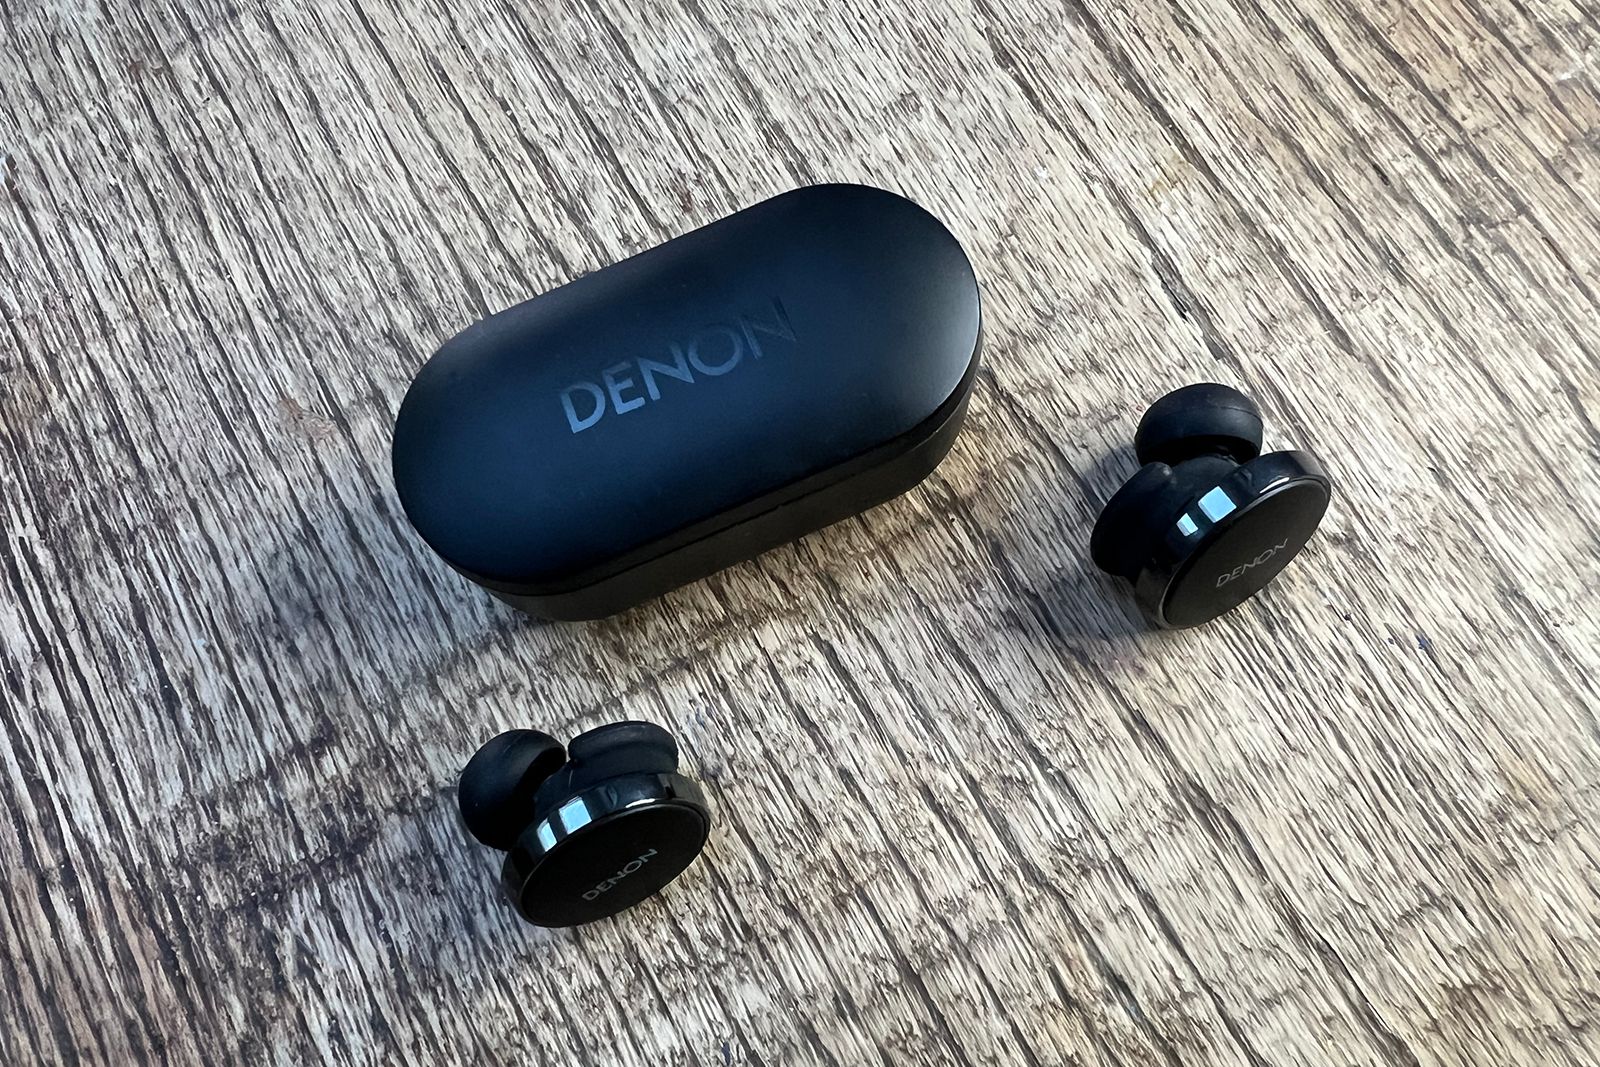 Denon PerL Pro review: The do-it-all earphones setting new standards